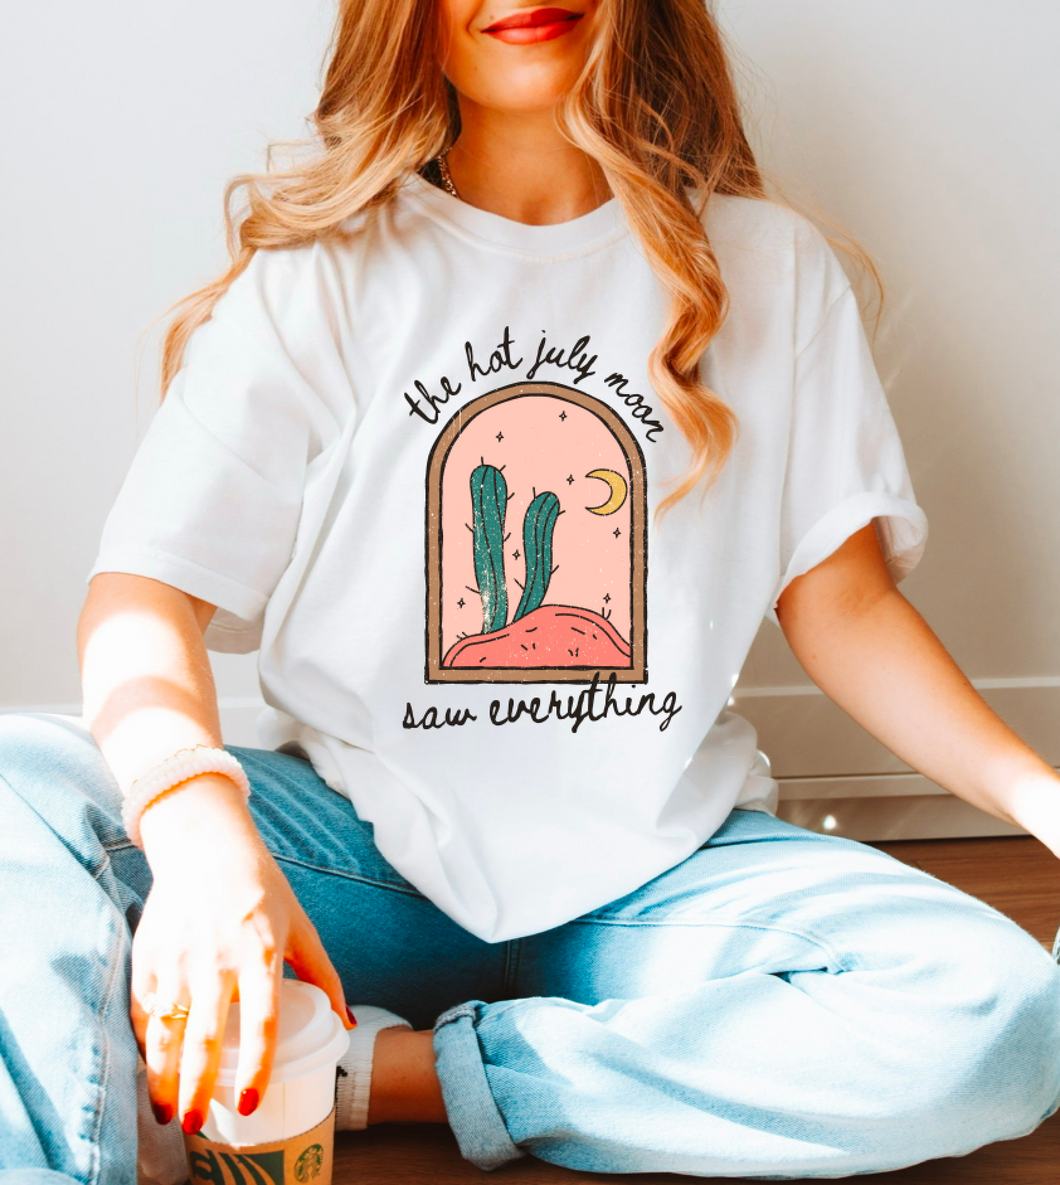 The Hot July Moon Saw Everything Shirt